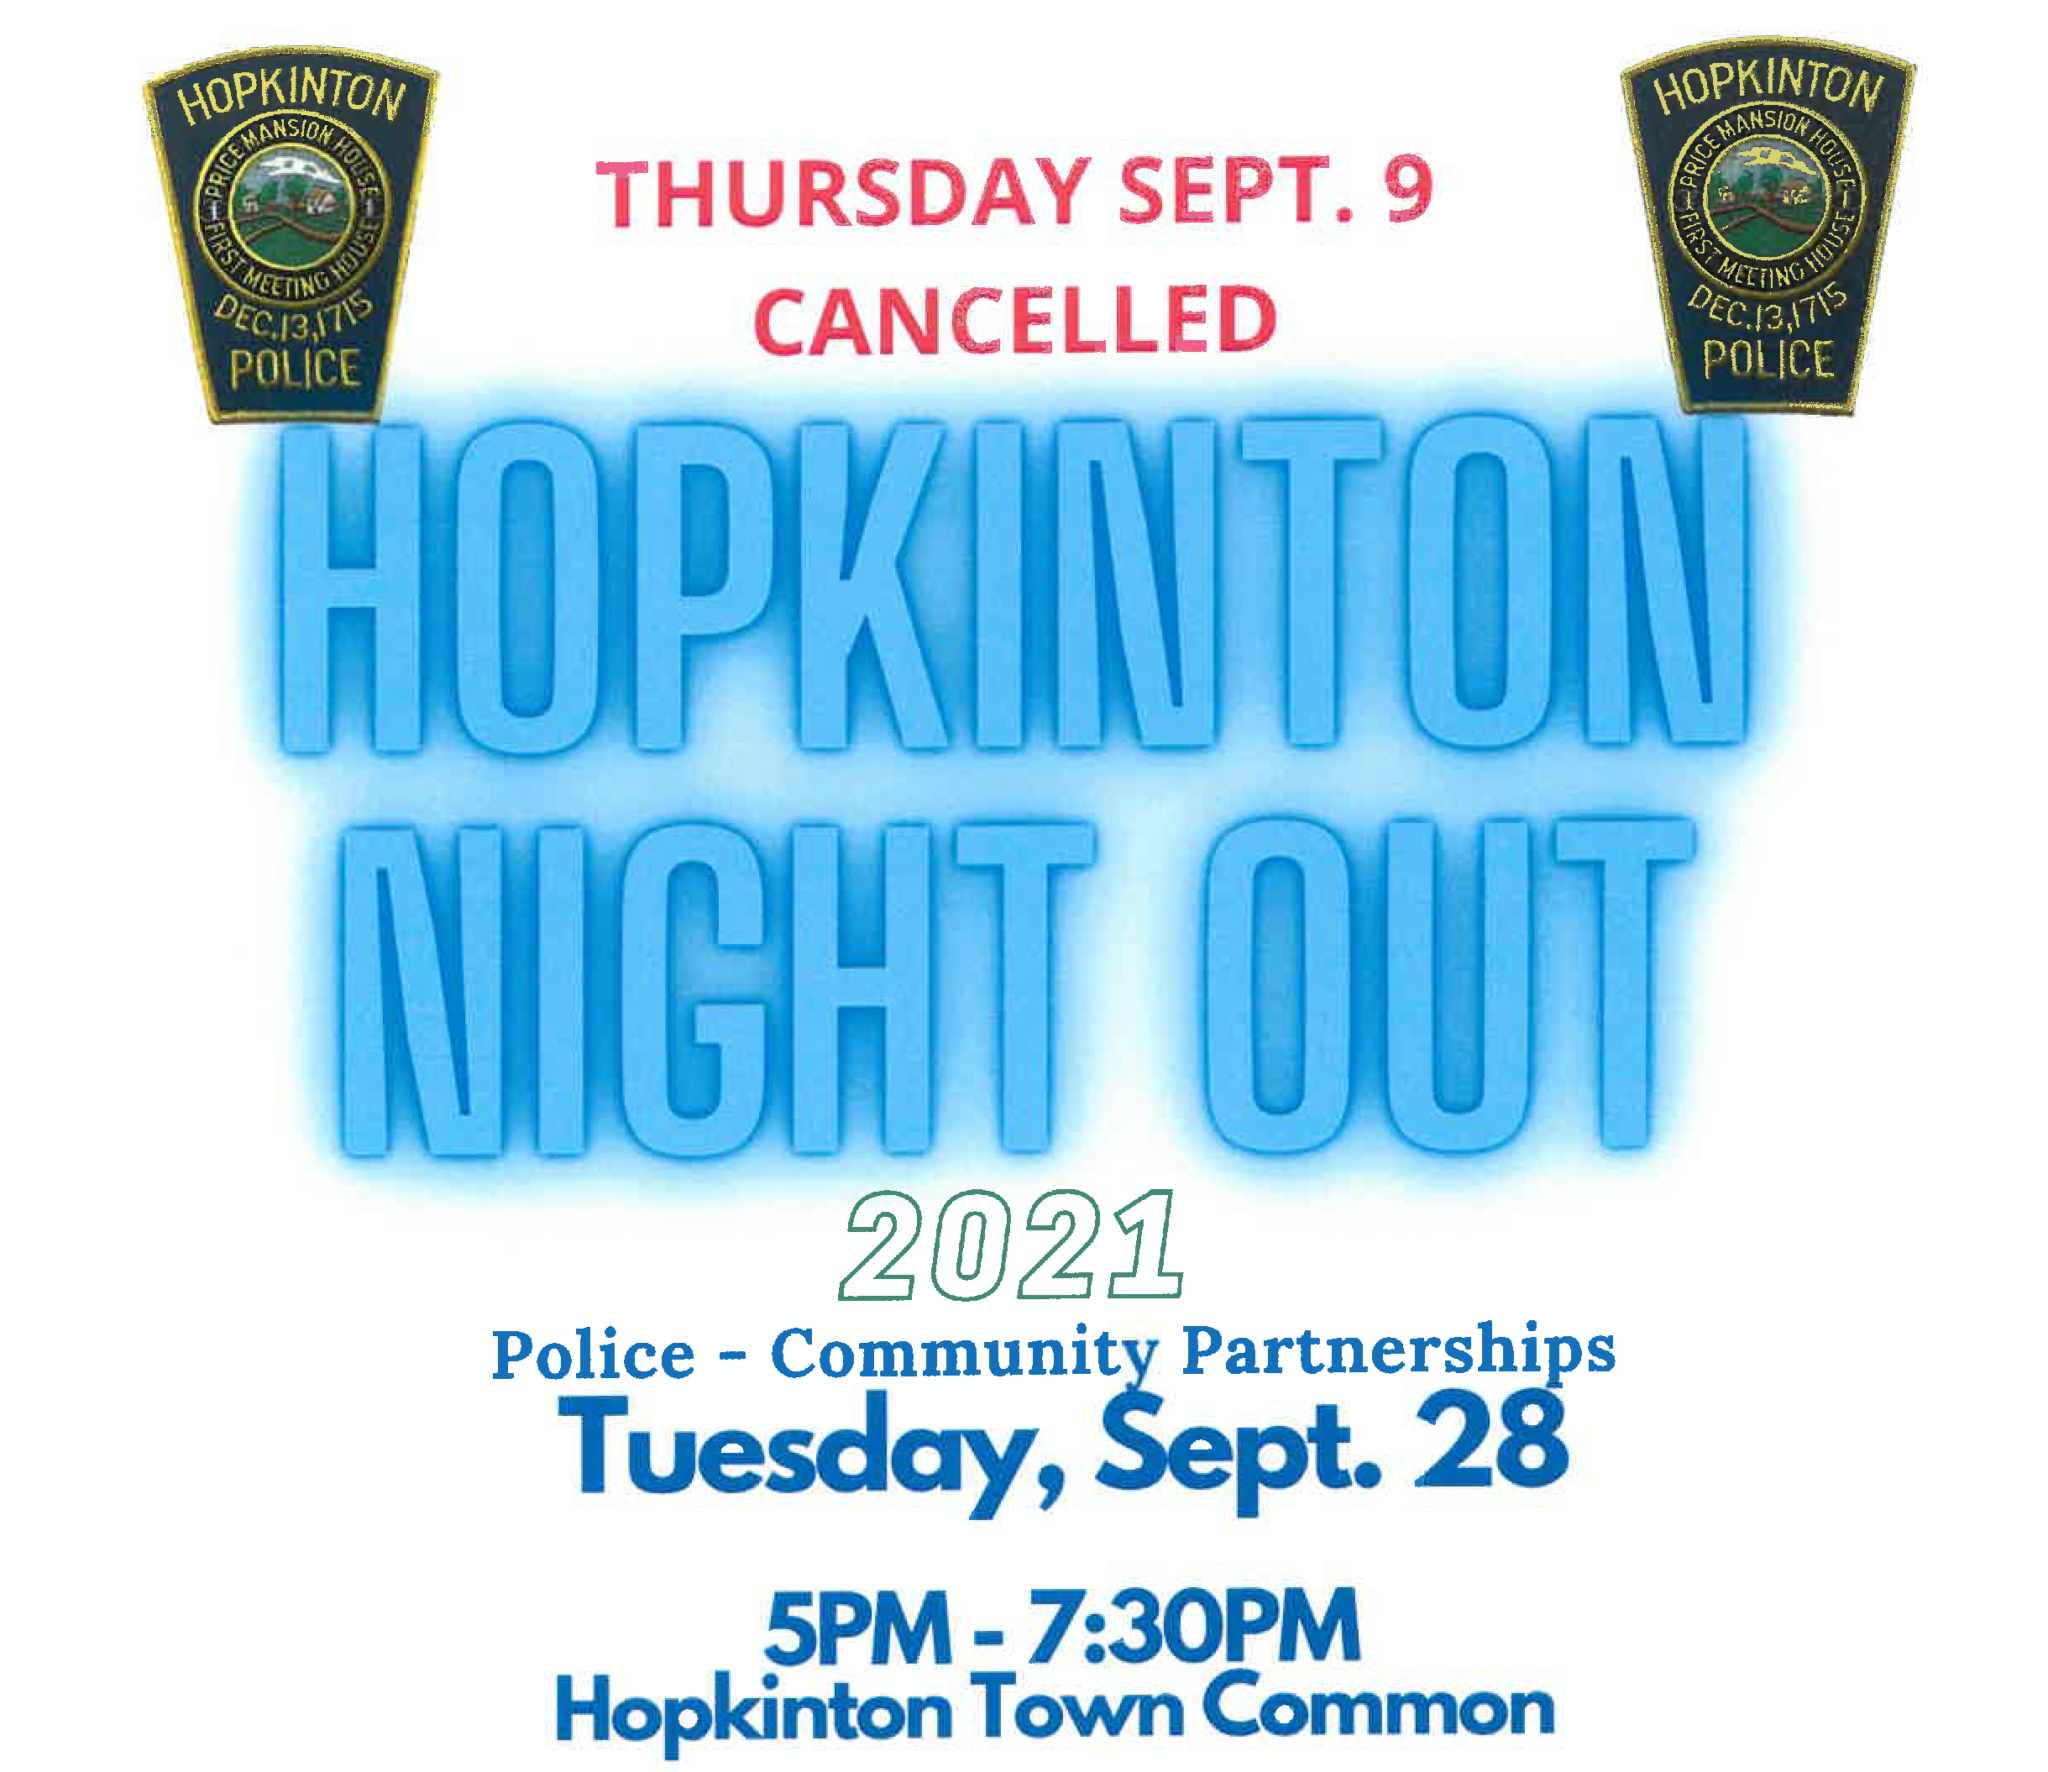 HPD’s Hopkinton Night Out canceled due to weather